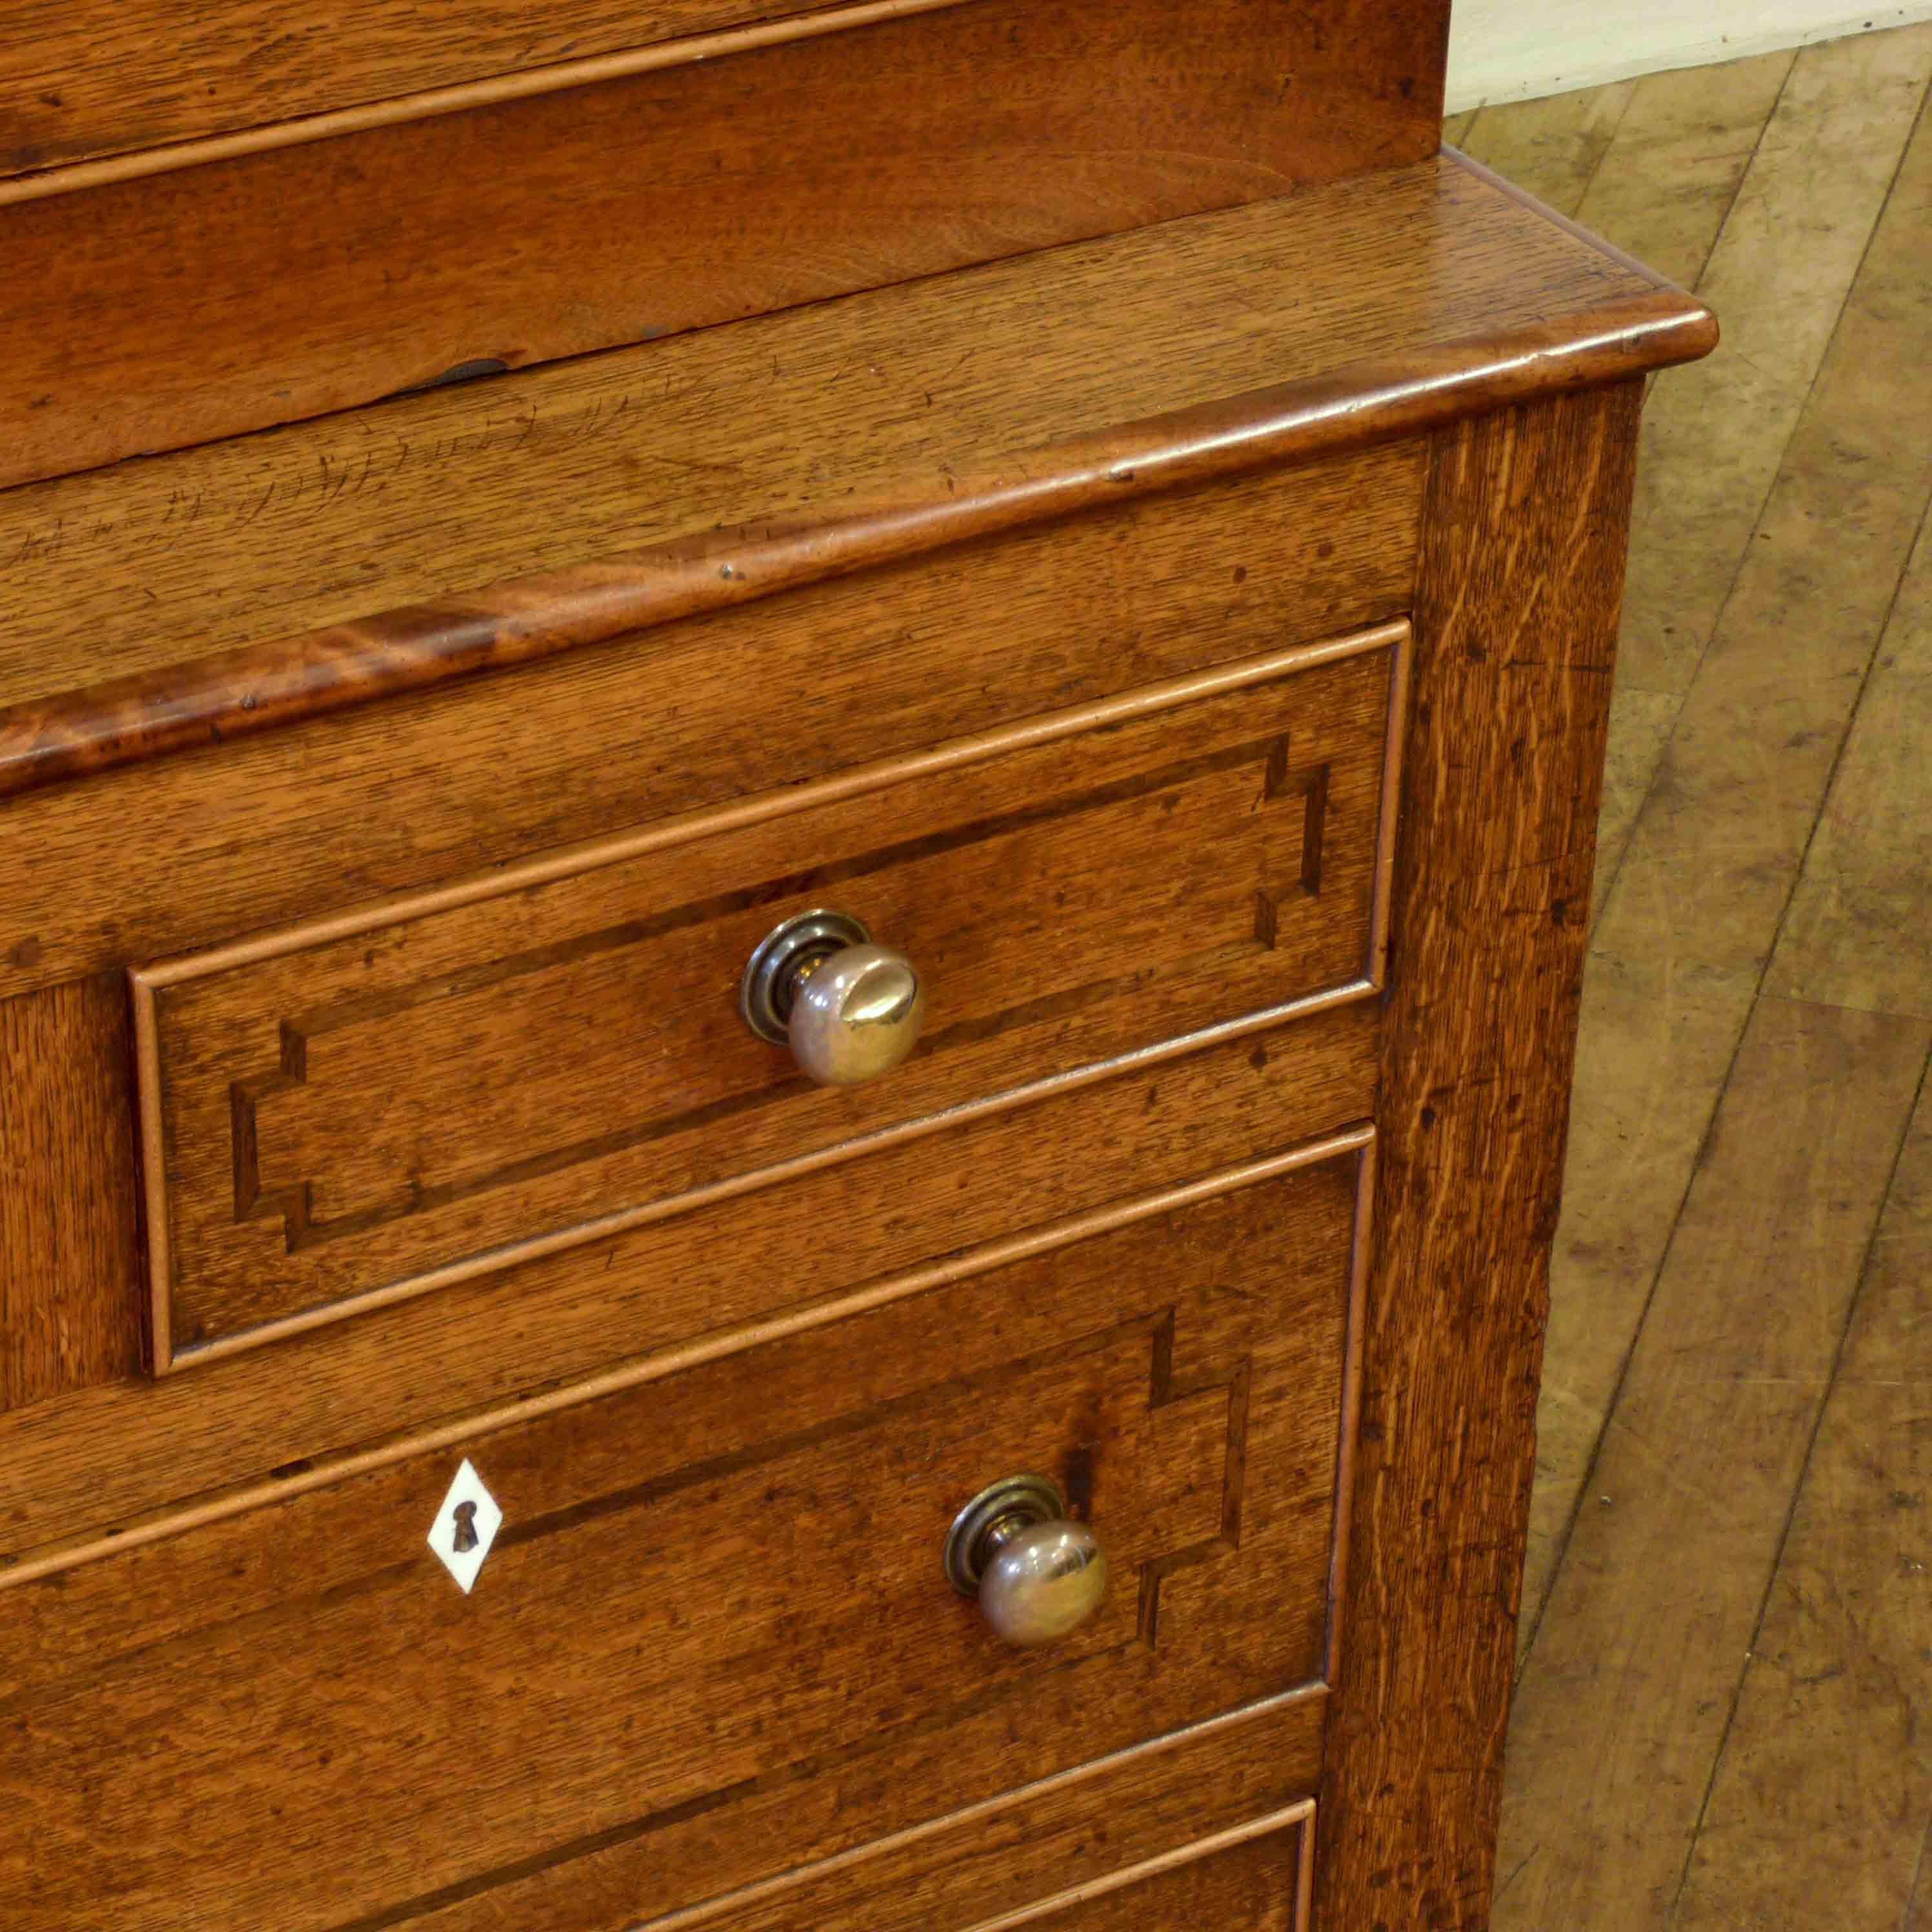 Most likely of Welsh origins this is a nice untouched example with 2 doors above and 3,2,1 arrangement of drawers, all with original brass knobs and working key for the cupboard. This piece is predominantly oak with mahogany crossbanding and veneer